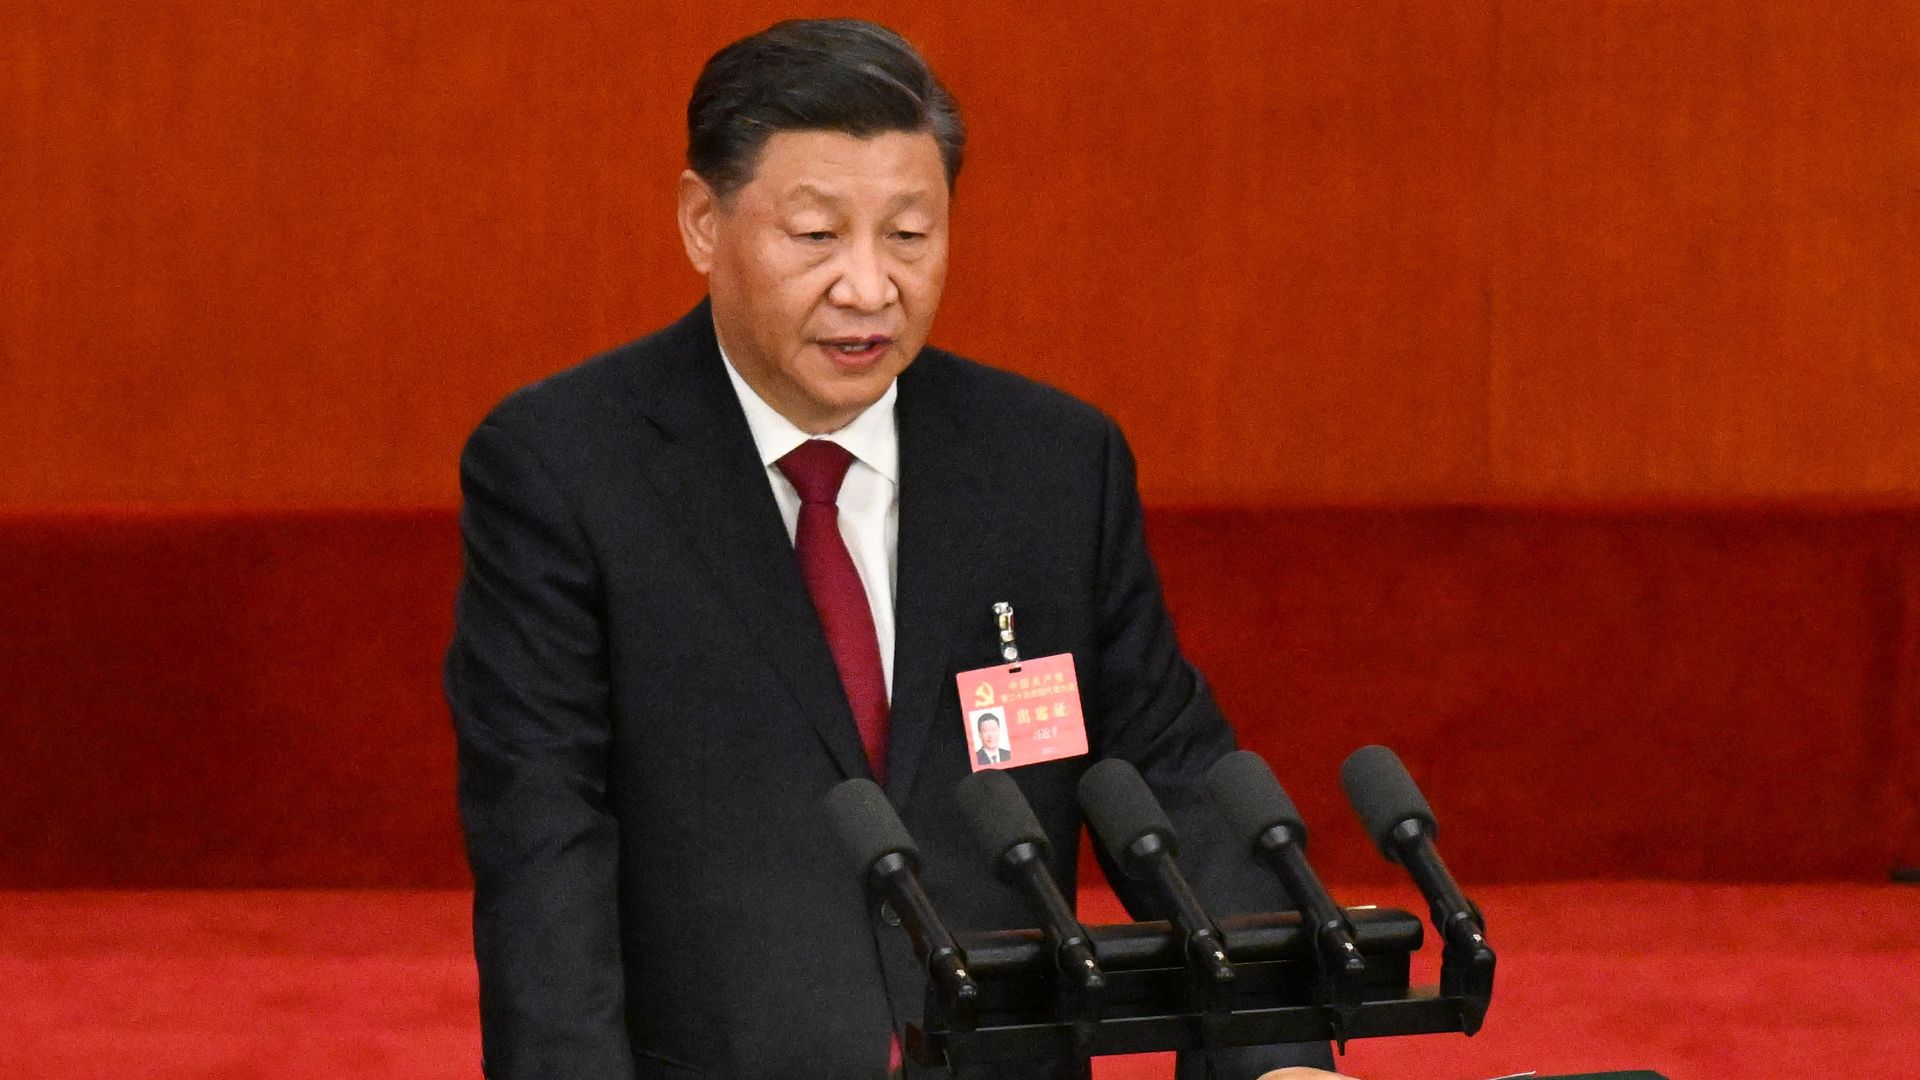 China's President Xi Jinping opens the 20th Chinese Communist Party Congress. Photo: Noel Celis/AFP via Getty Images